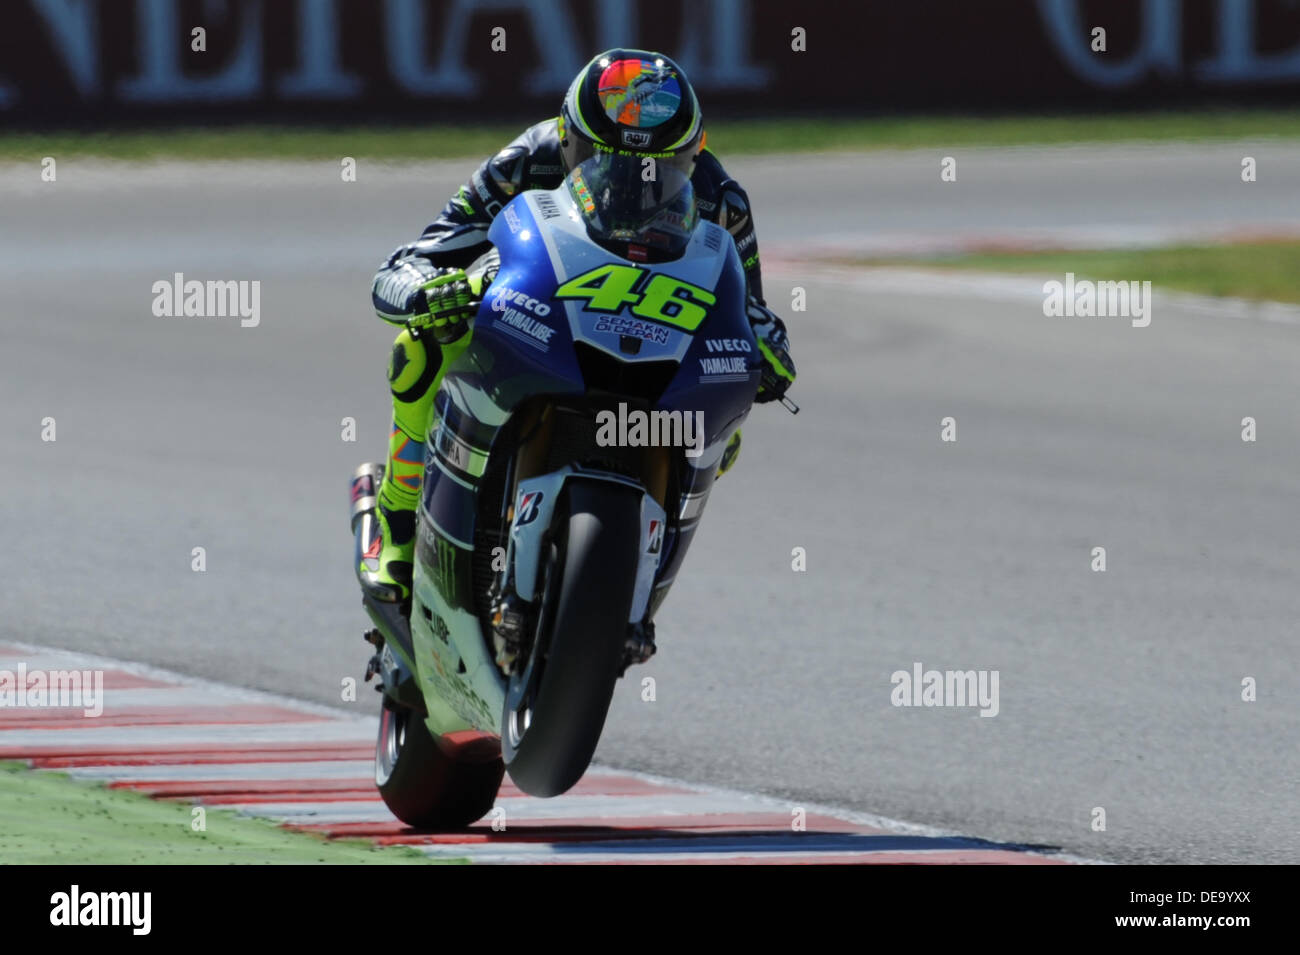 Misano Adriatico, Italy. 14th Sep, 2013. Valentino Rossi (Yamaha Factory Racing) during the qualifiyng sessions at Misano Circuit Credit:  Gaetano Piazzolla/Alamy Live News Stock Photo